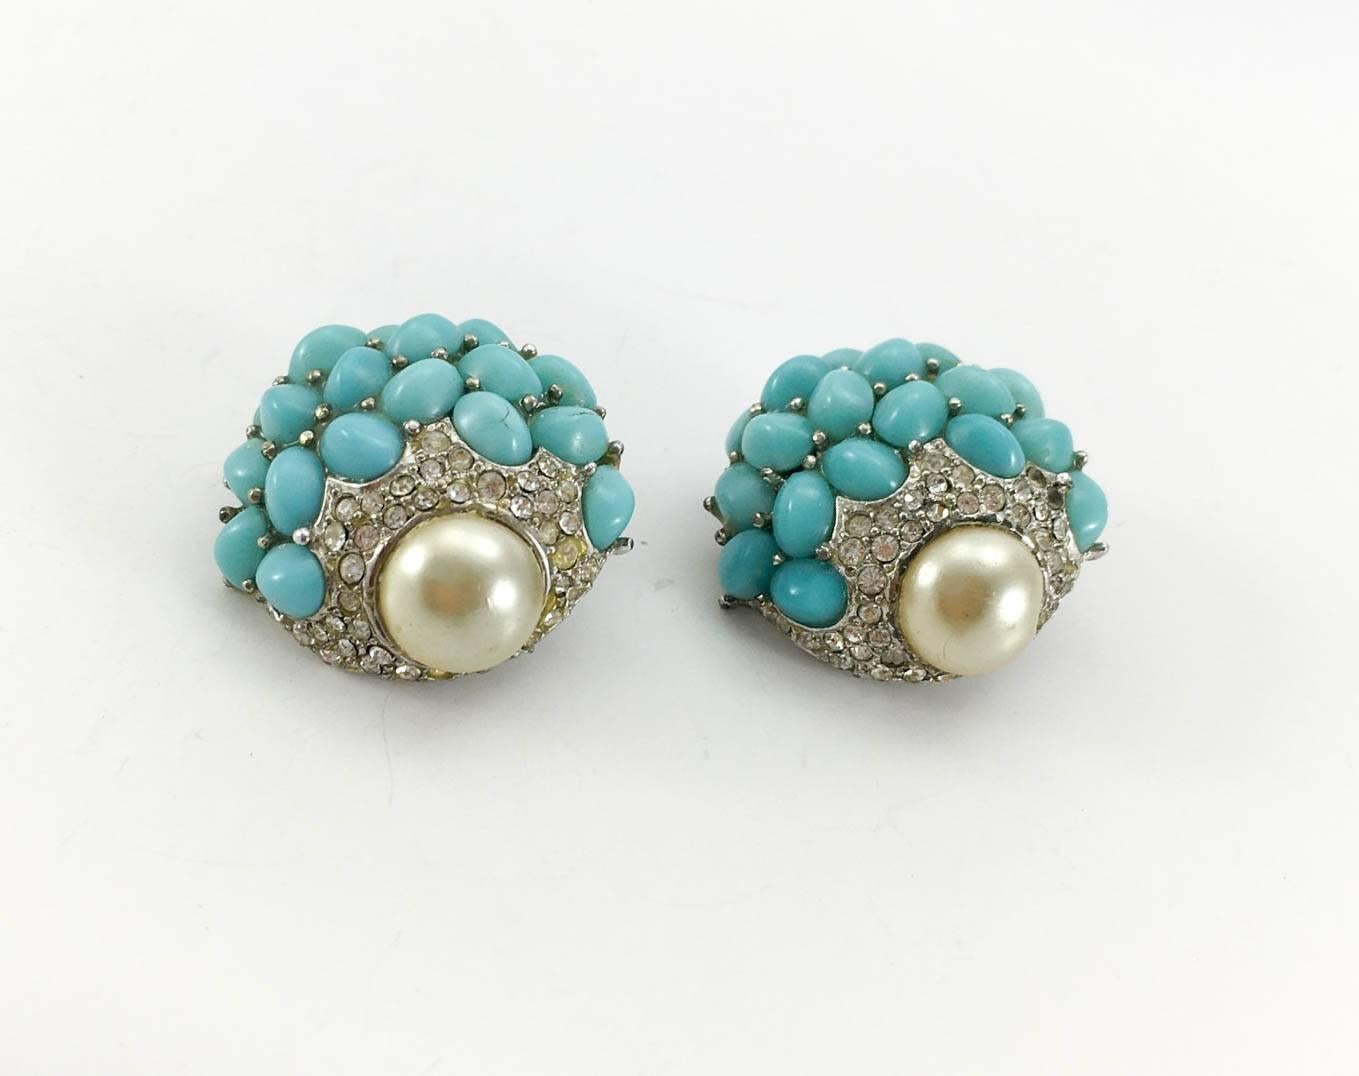 Boucher Faux Turquoise and Pearl Earring and Brooch Set - 1950s 1